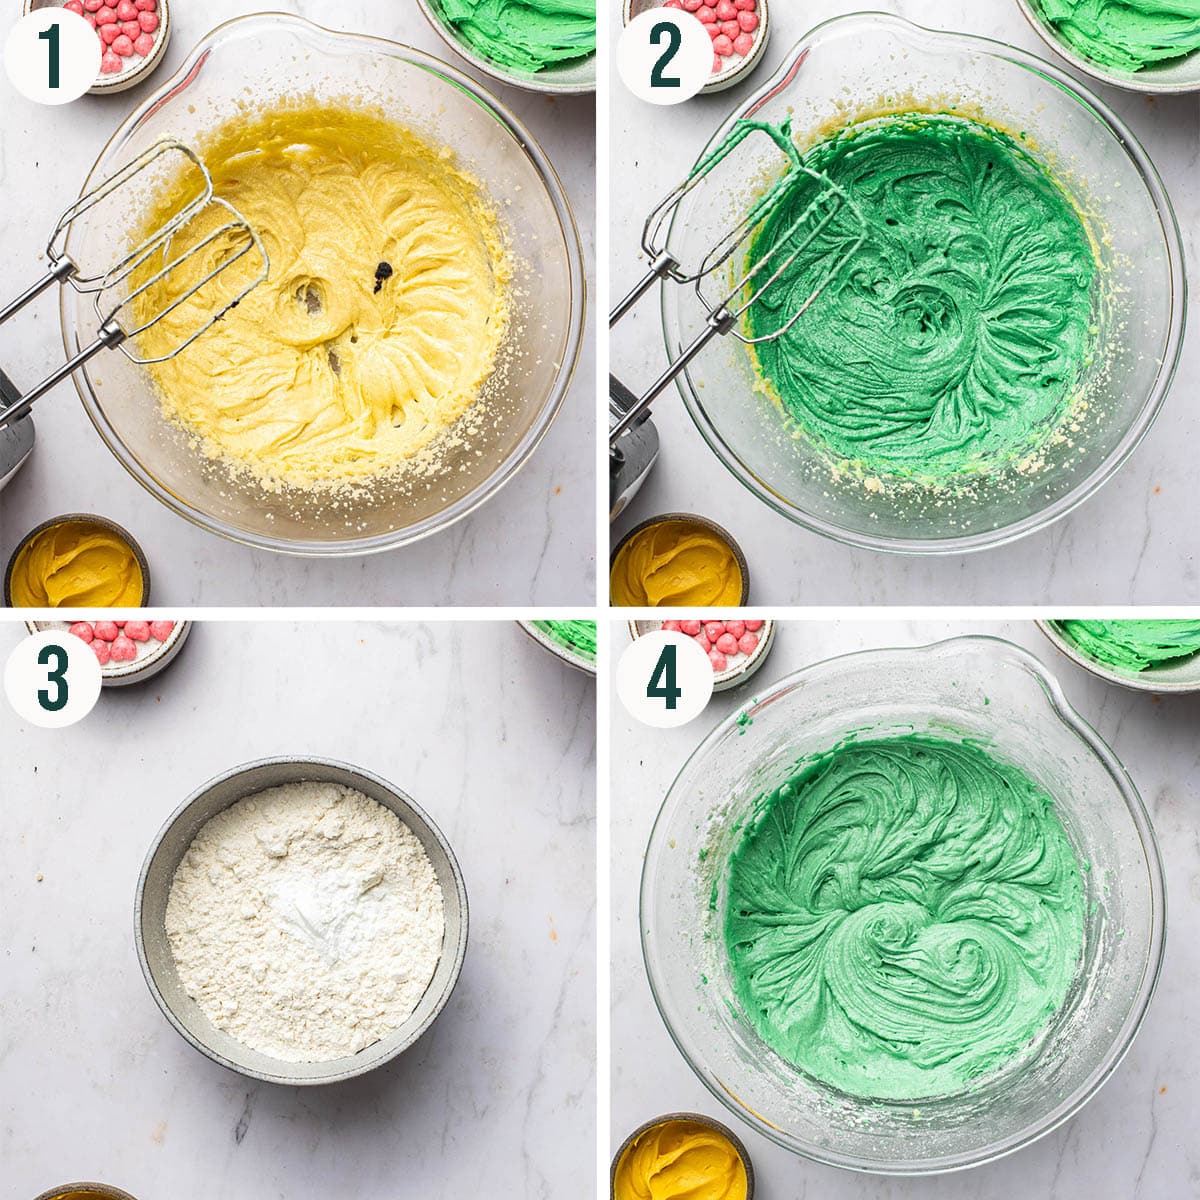 Green cupcakes steps 1 to 4, mixing the batter.